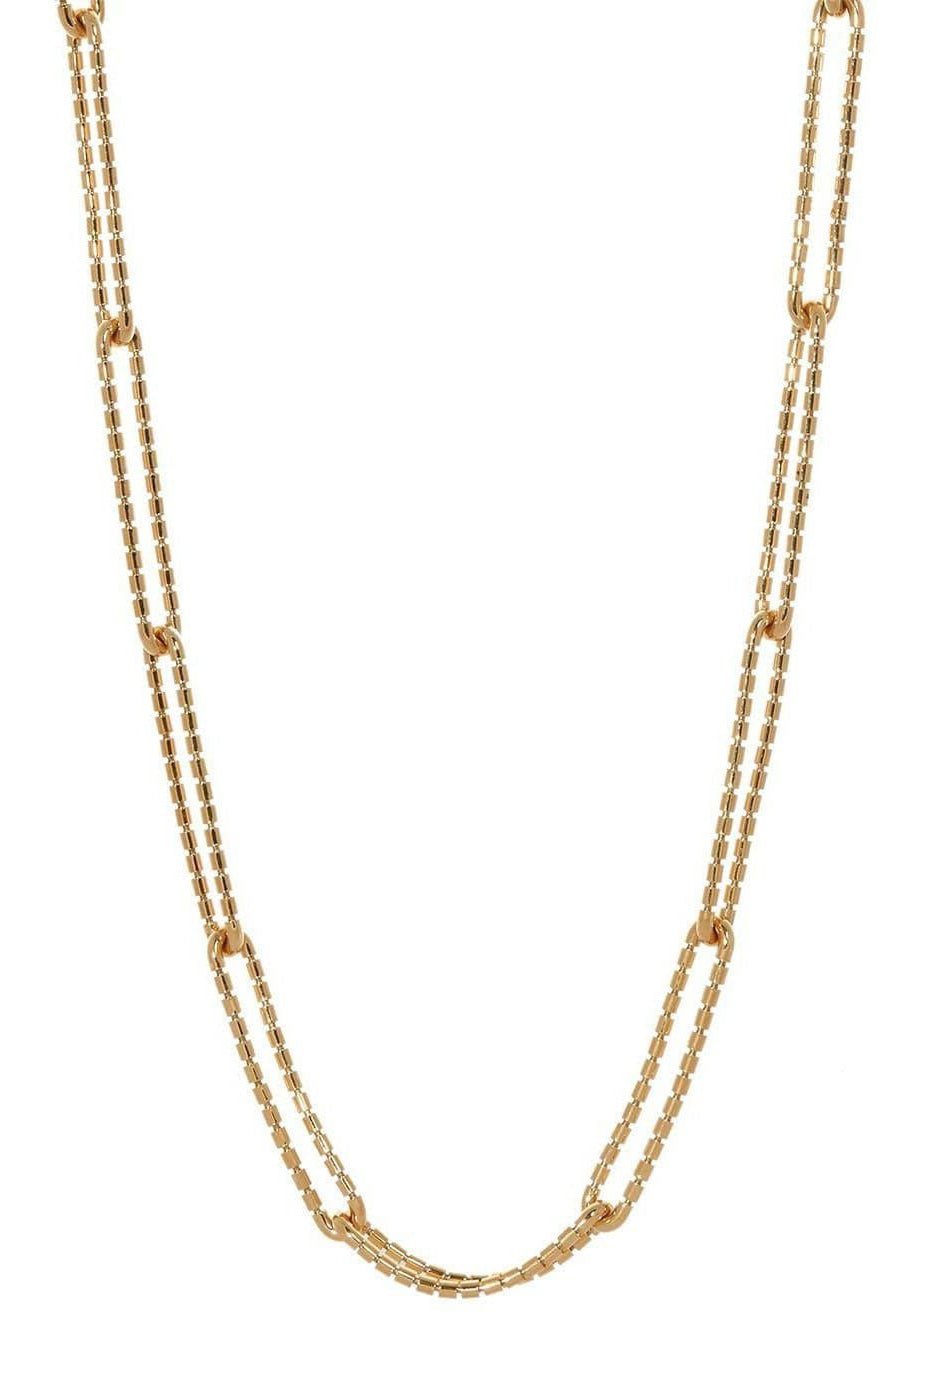 SIDNEY GARBER-Flexible Golden Links Necklace-YELLOW GOLD